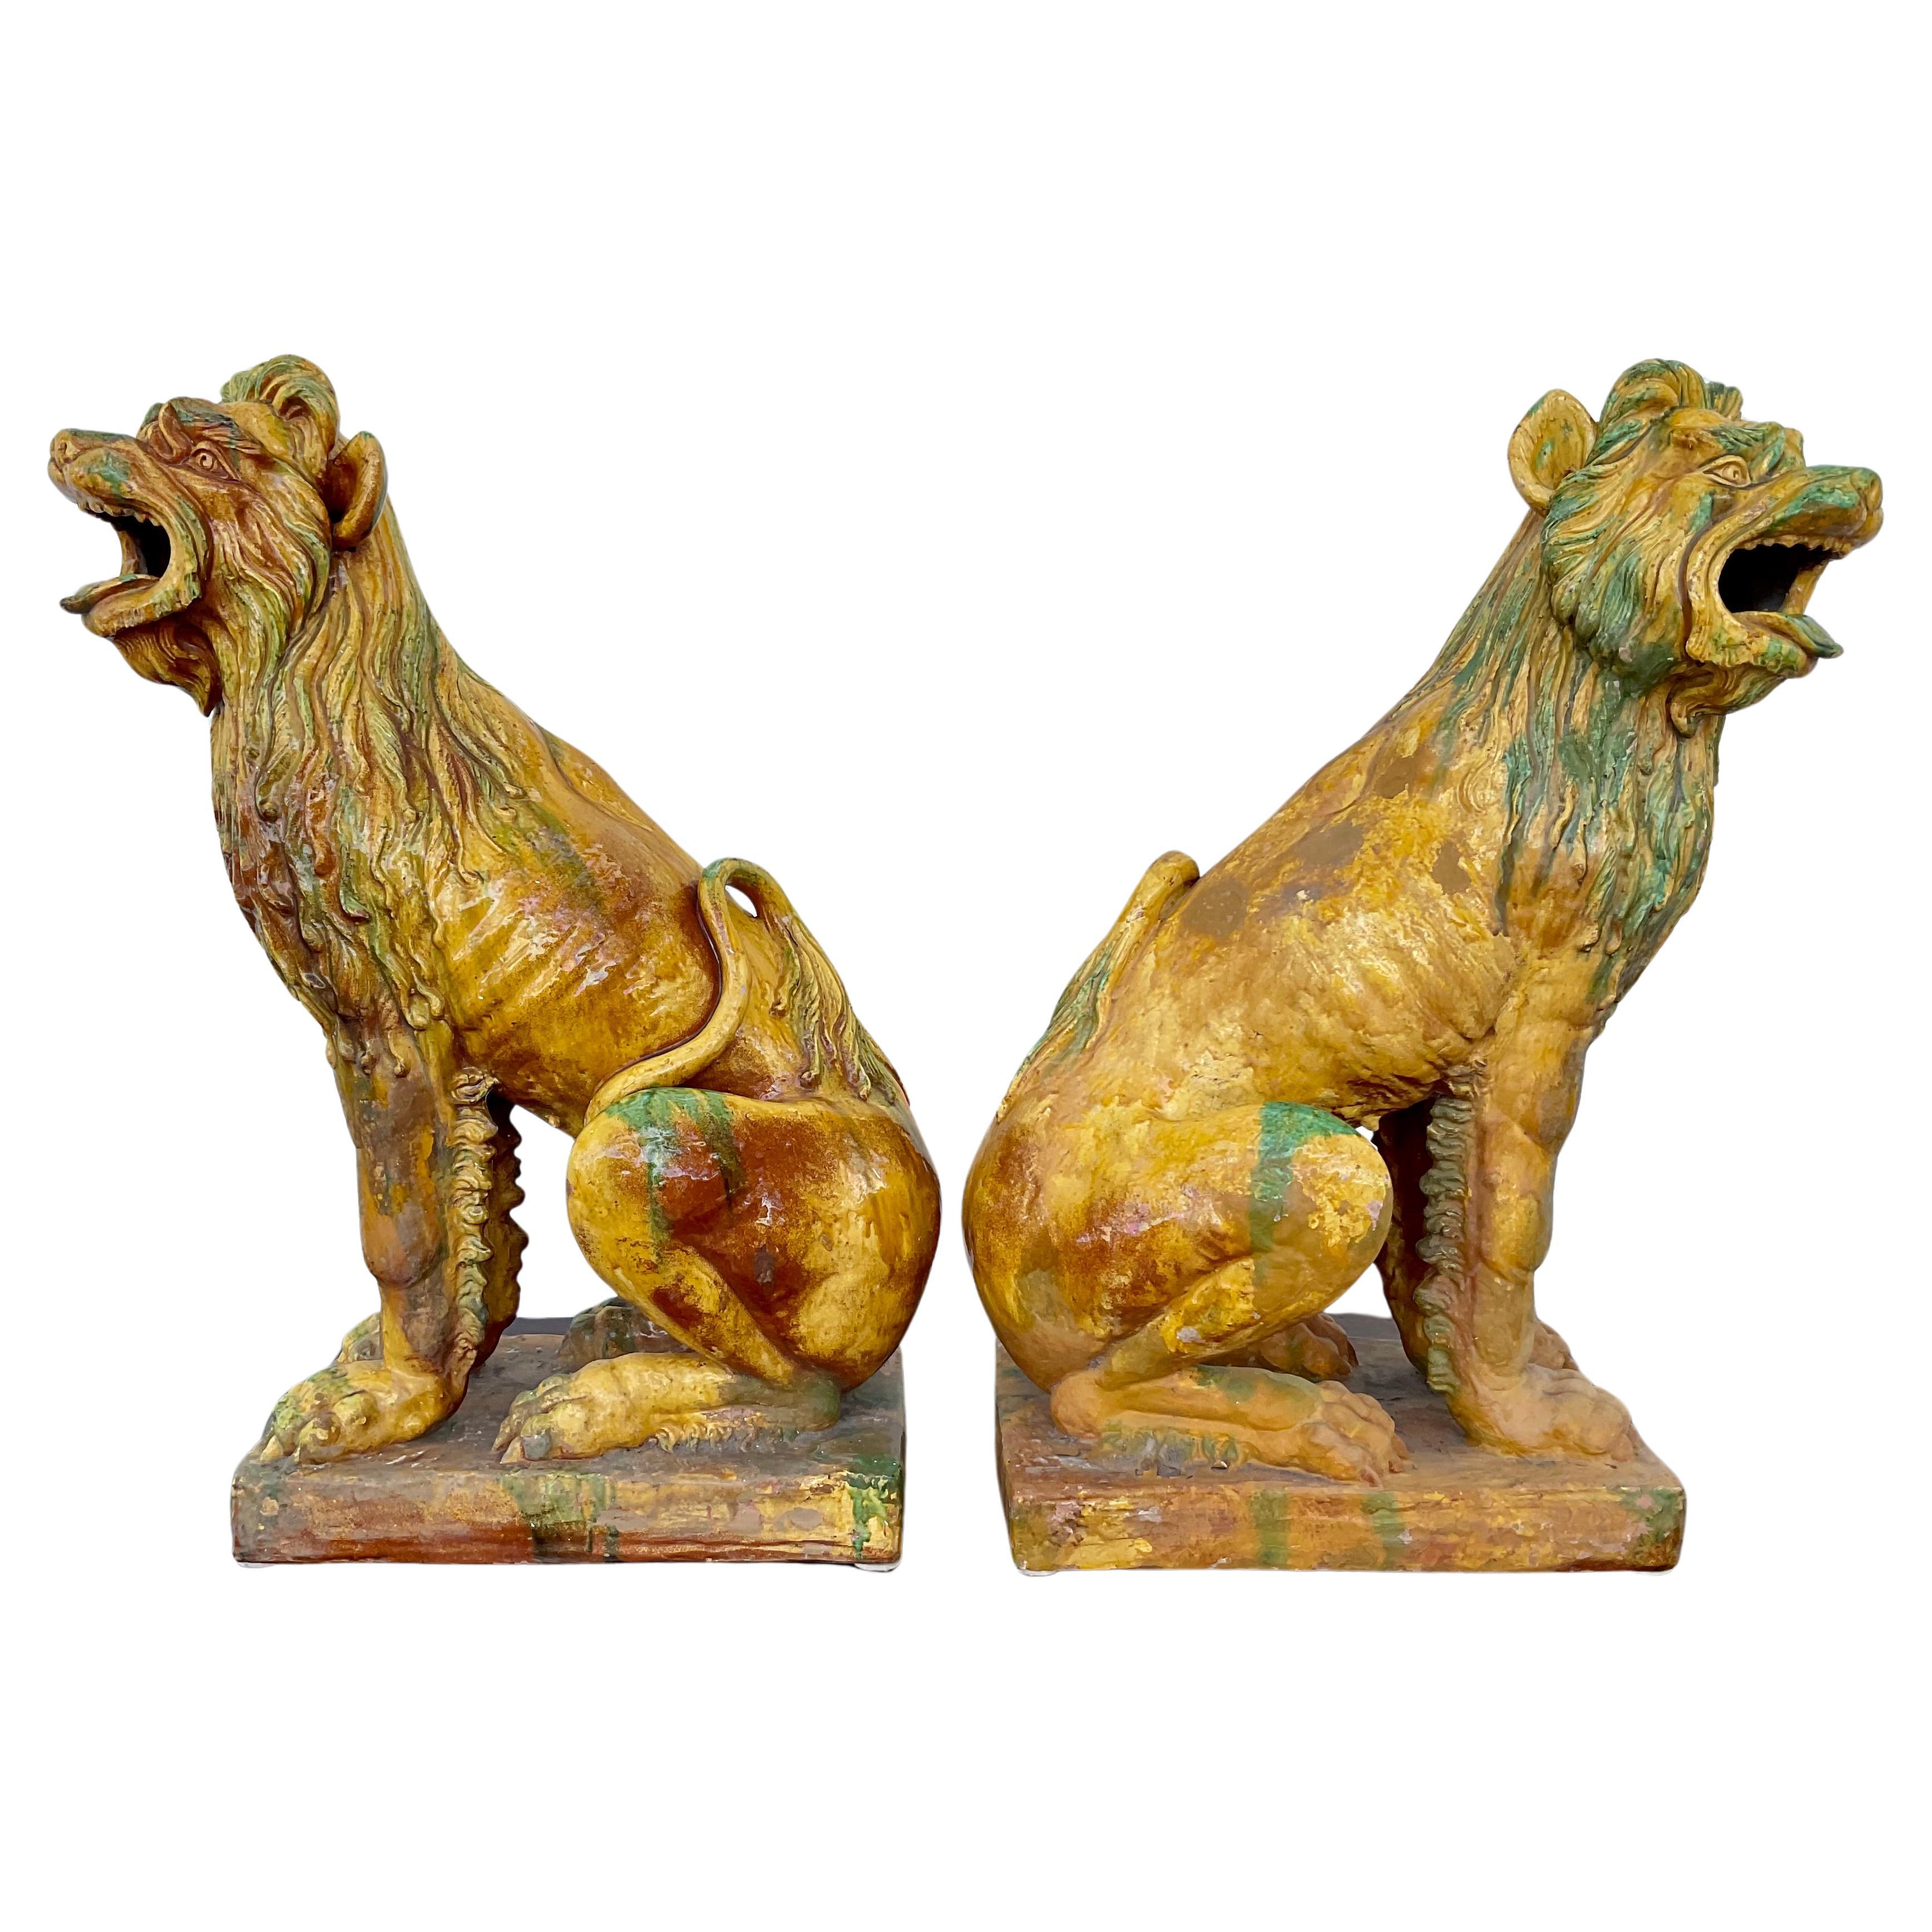 Pottery Pair of Large Glazed Terra Cotta Lions or Foo Dogs For Sale